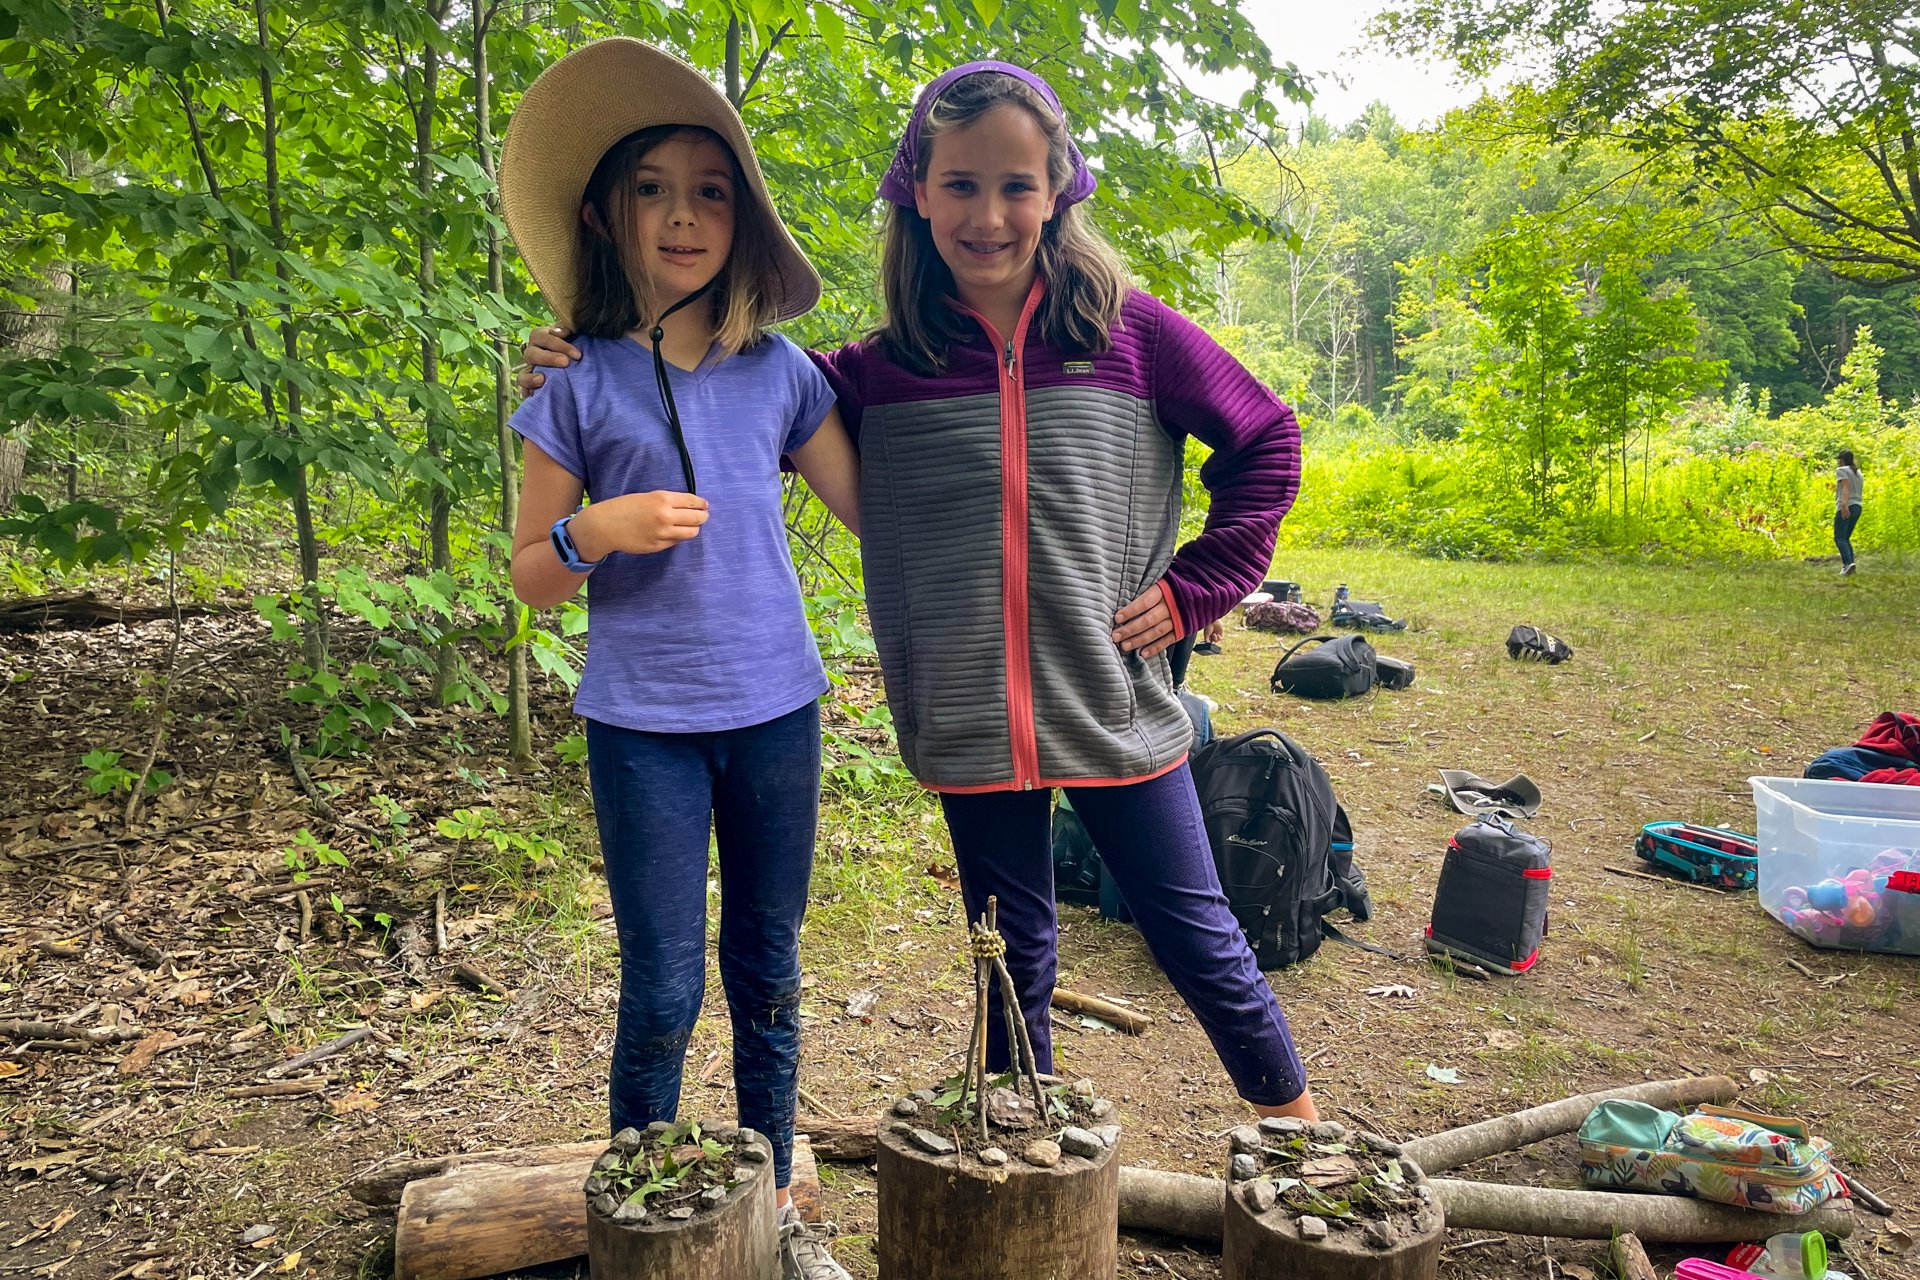 Two Berkshires campers smiling and showing off their art creations, made out of found objects in nature